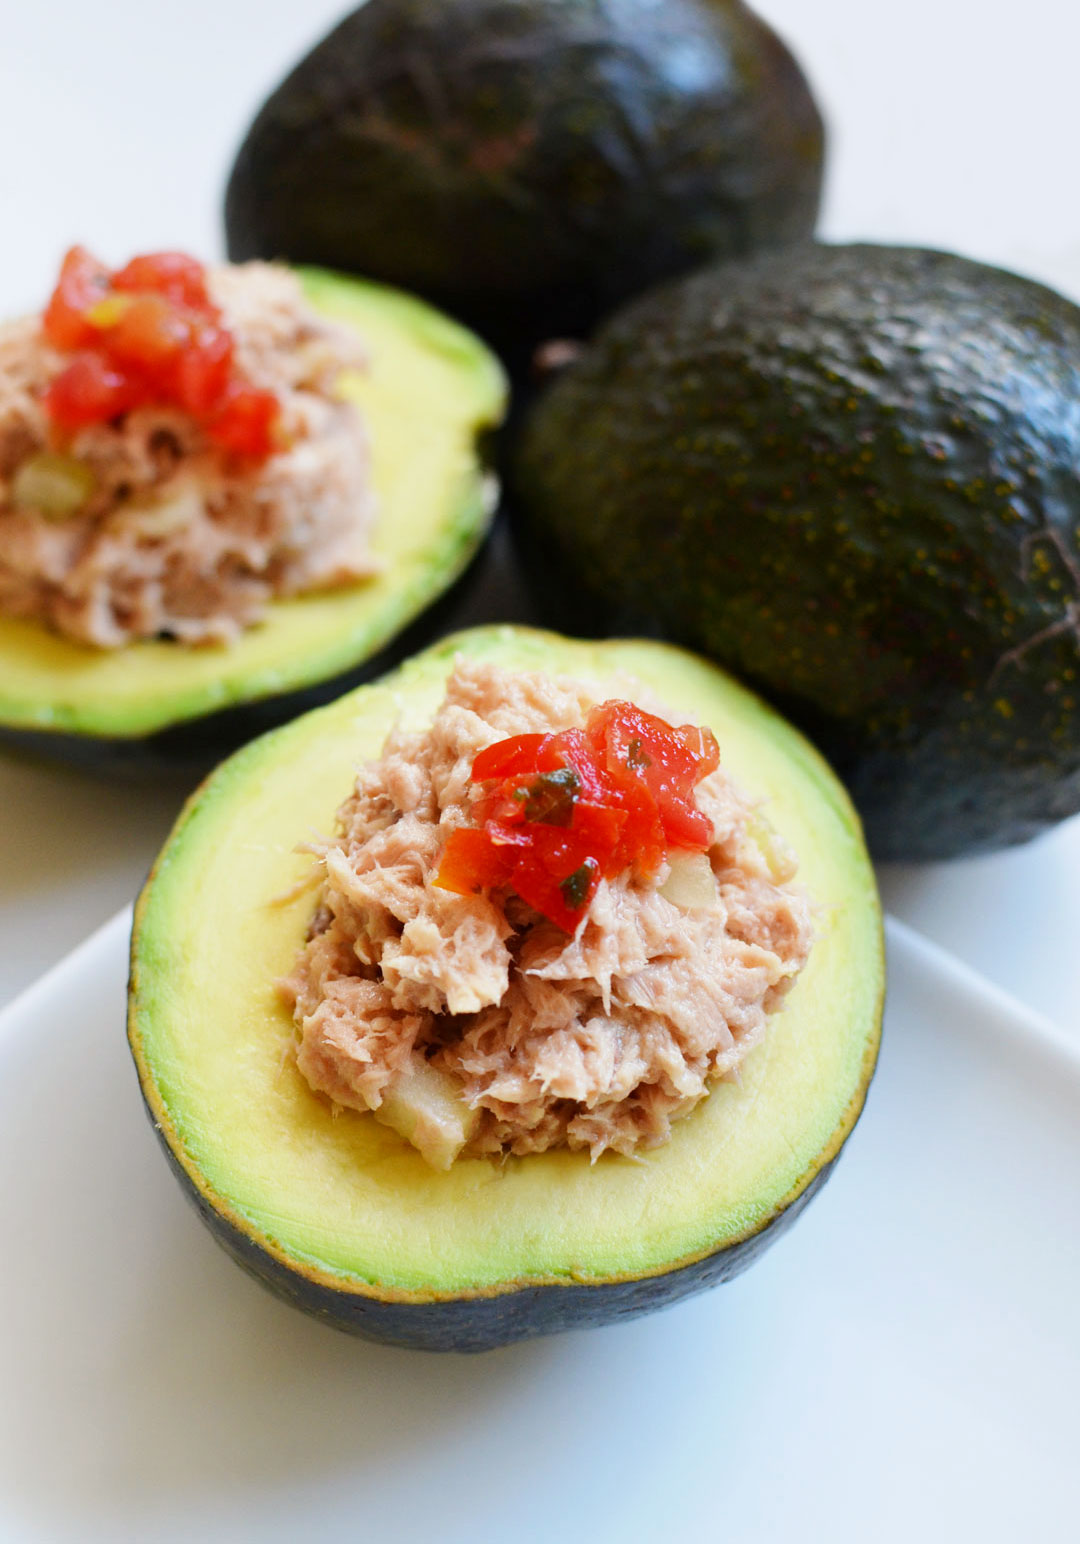 Why you should eat avocado everyday